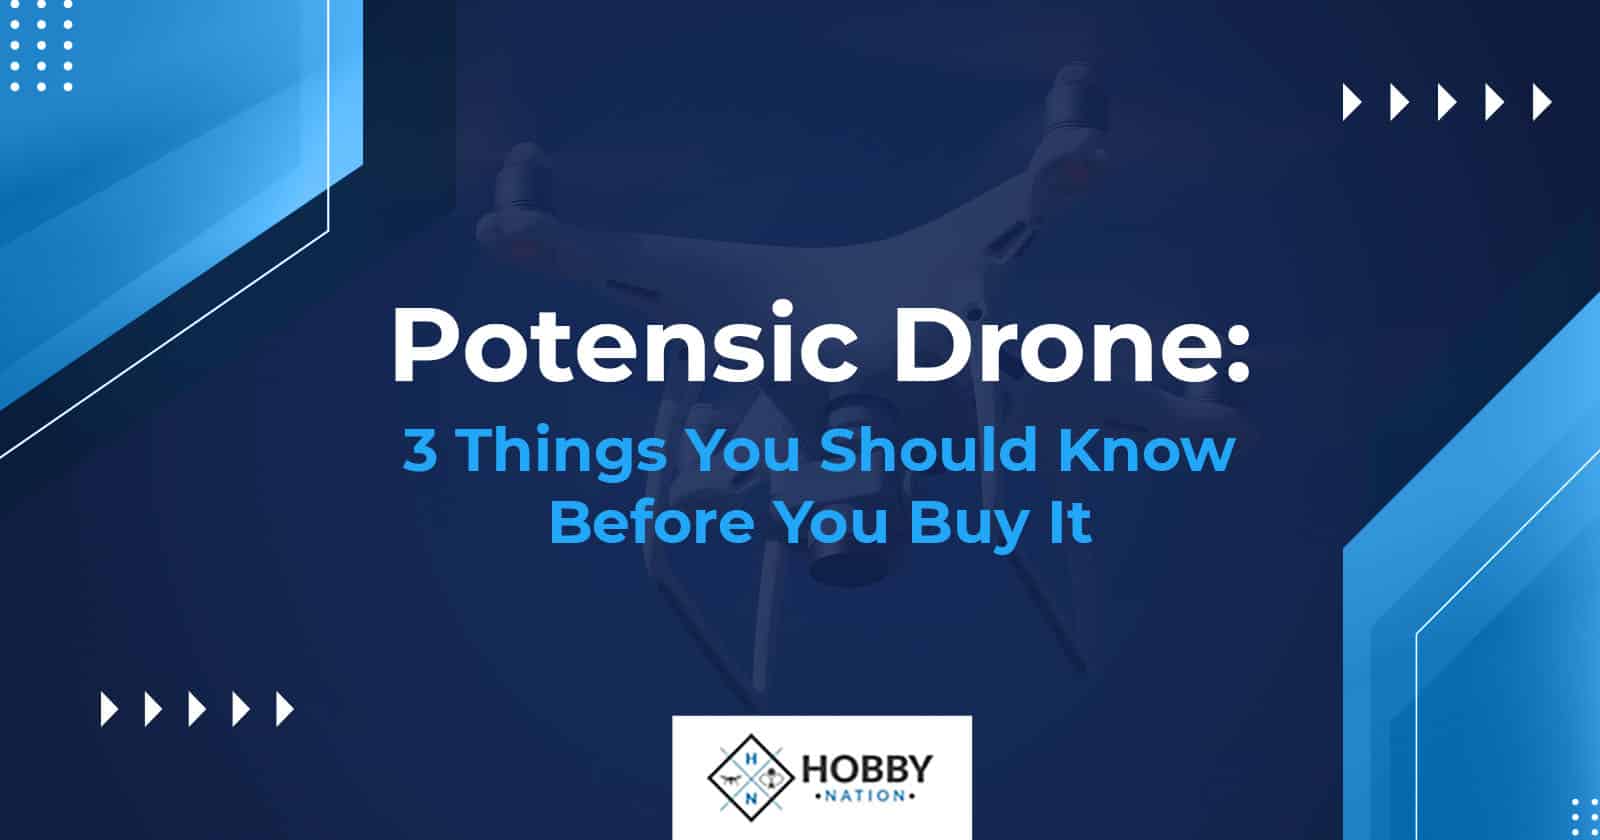 Potensic Drone: 3 Things You Should Know Before You Buy It